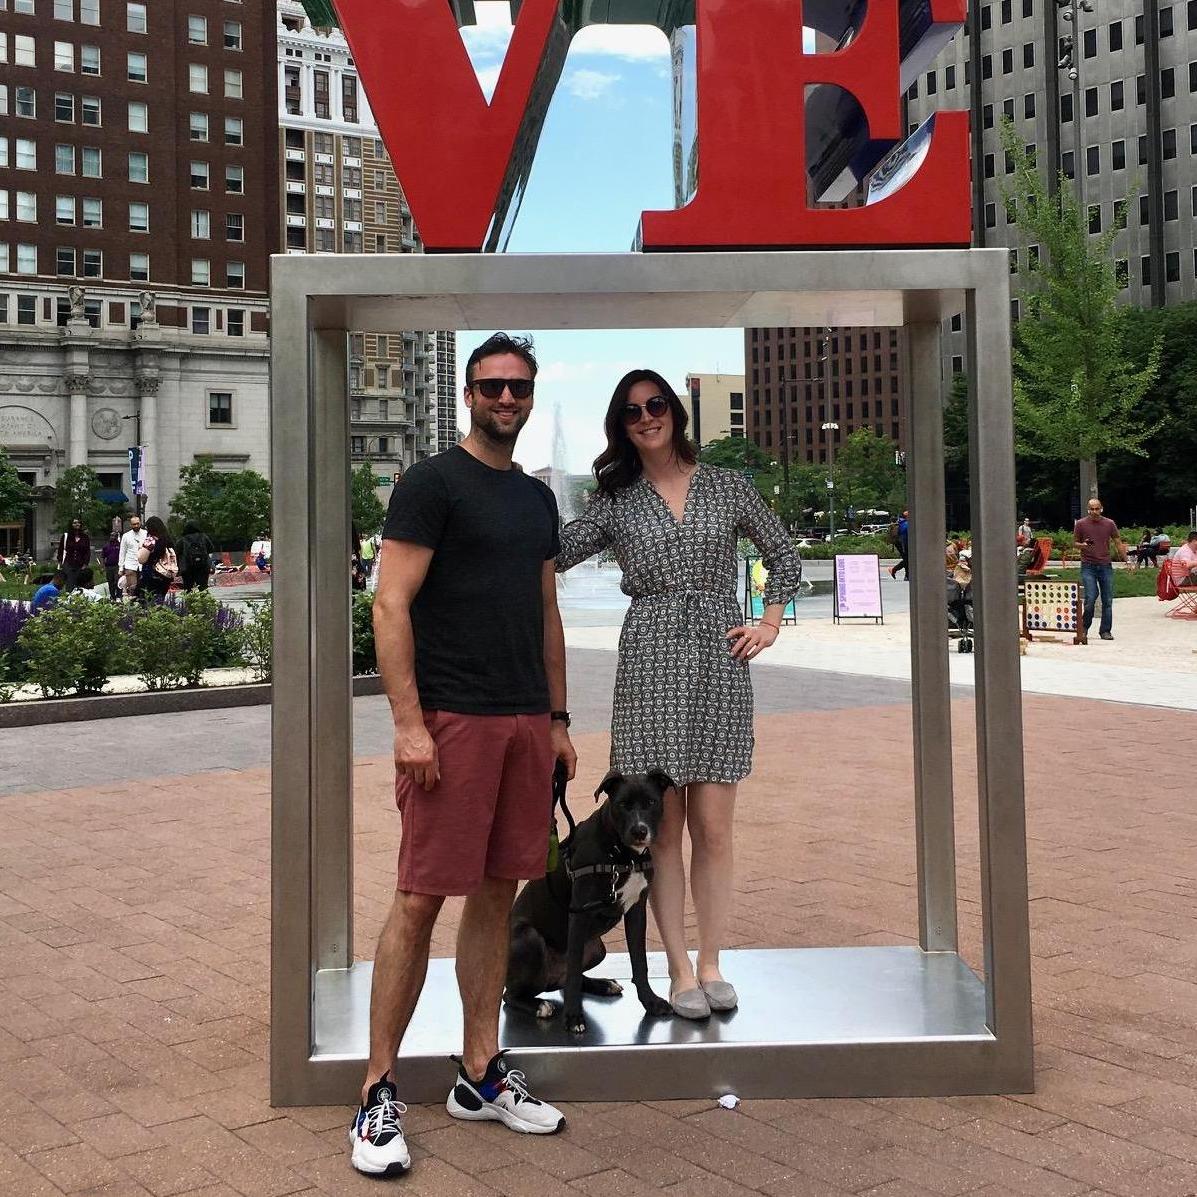 Adventures in Philly (May 2019)